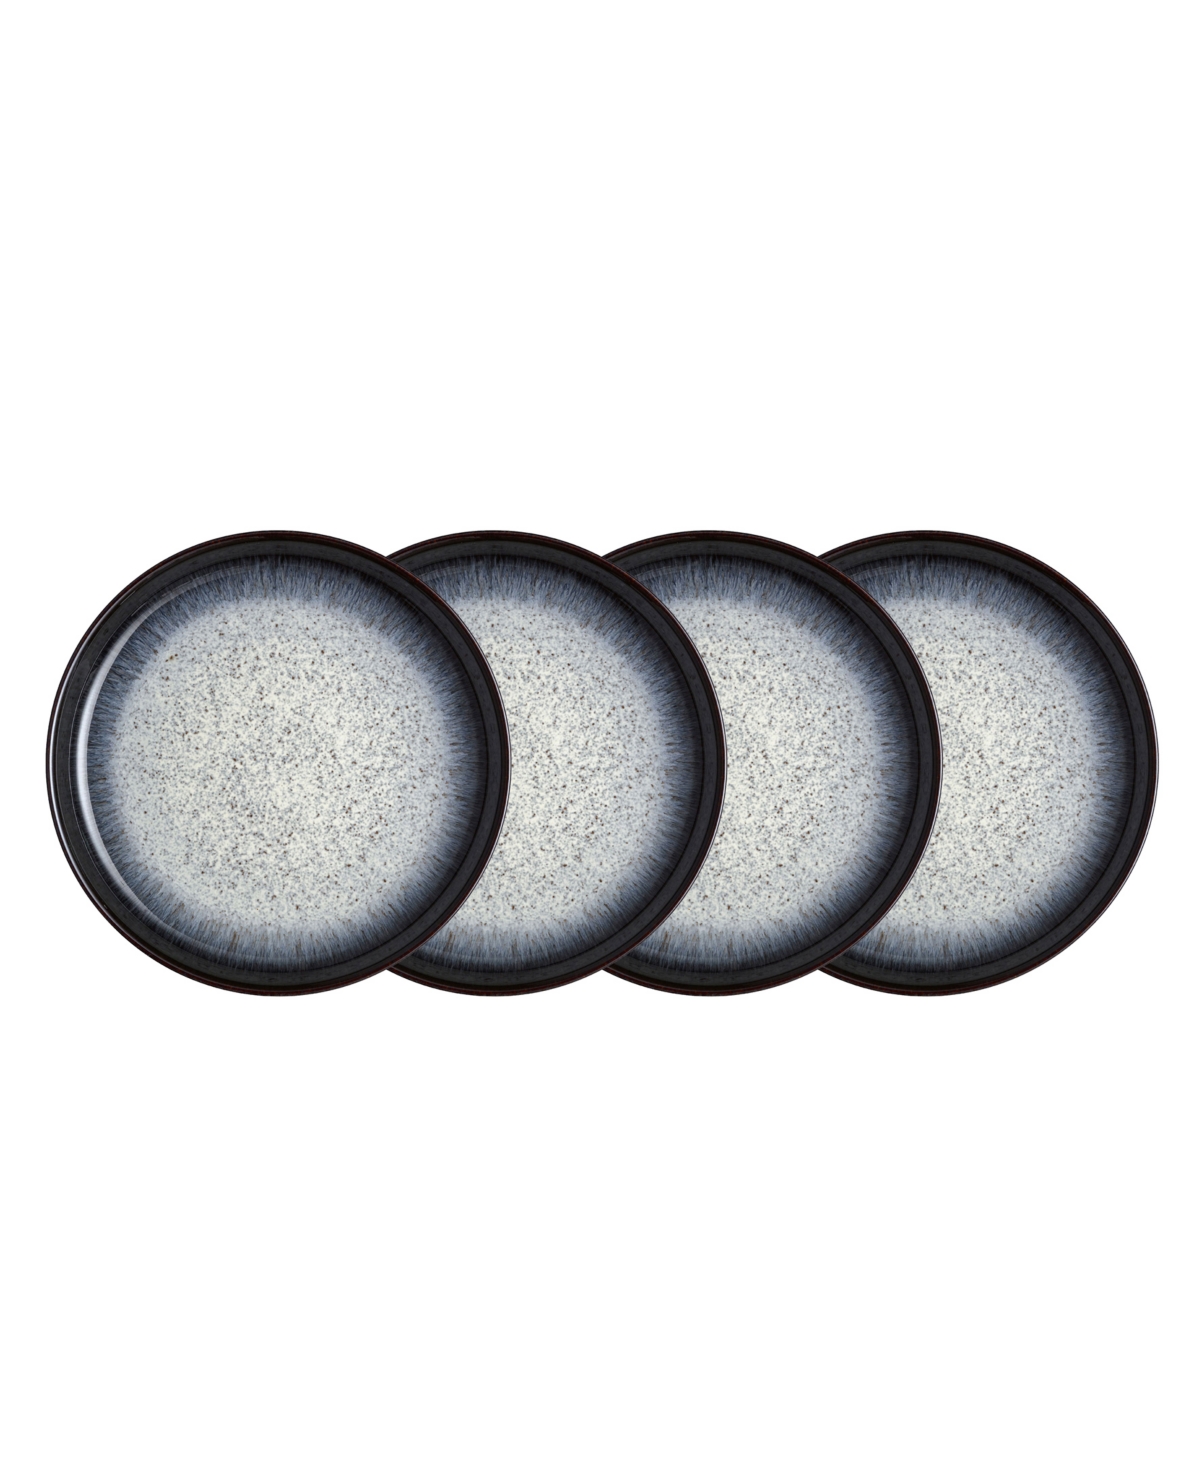 Halo Coupe Set of 4 Dinner Plates - Black